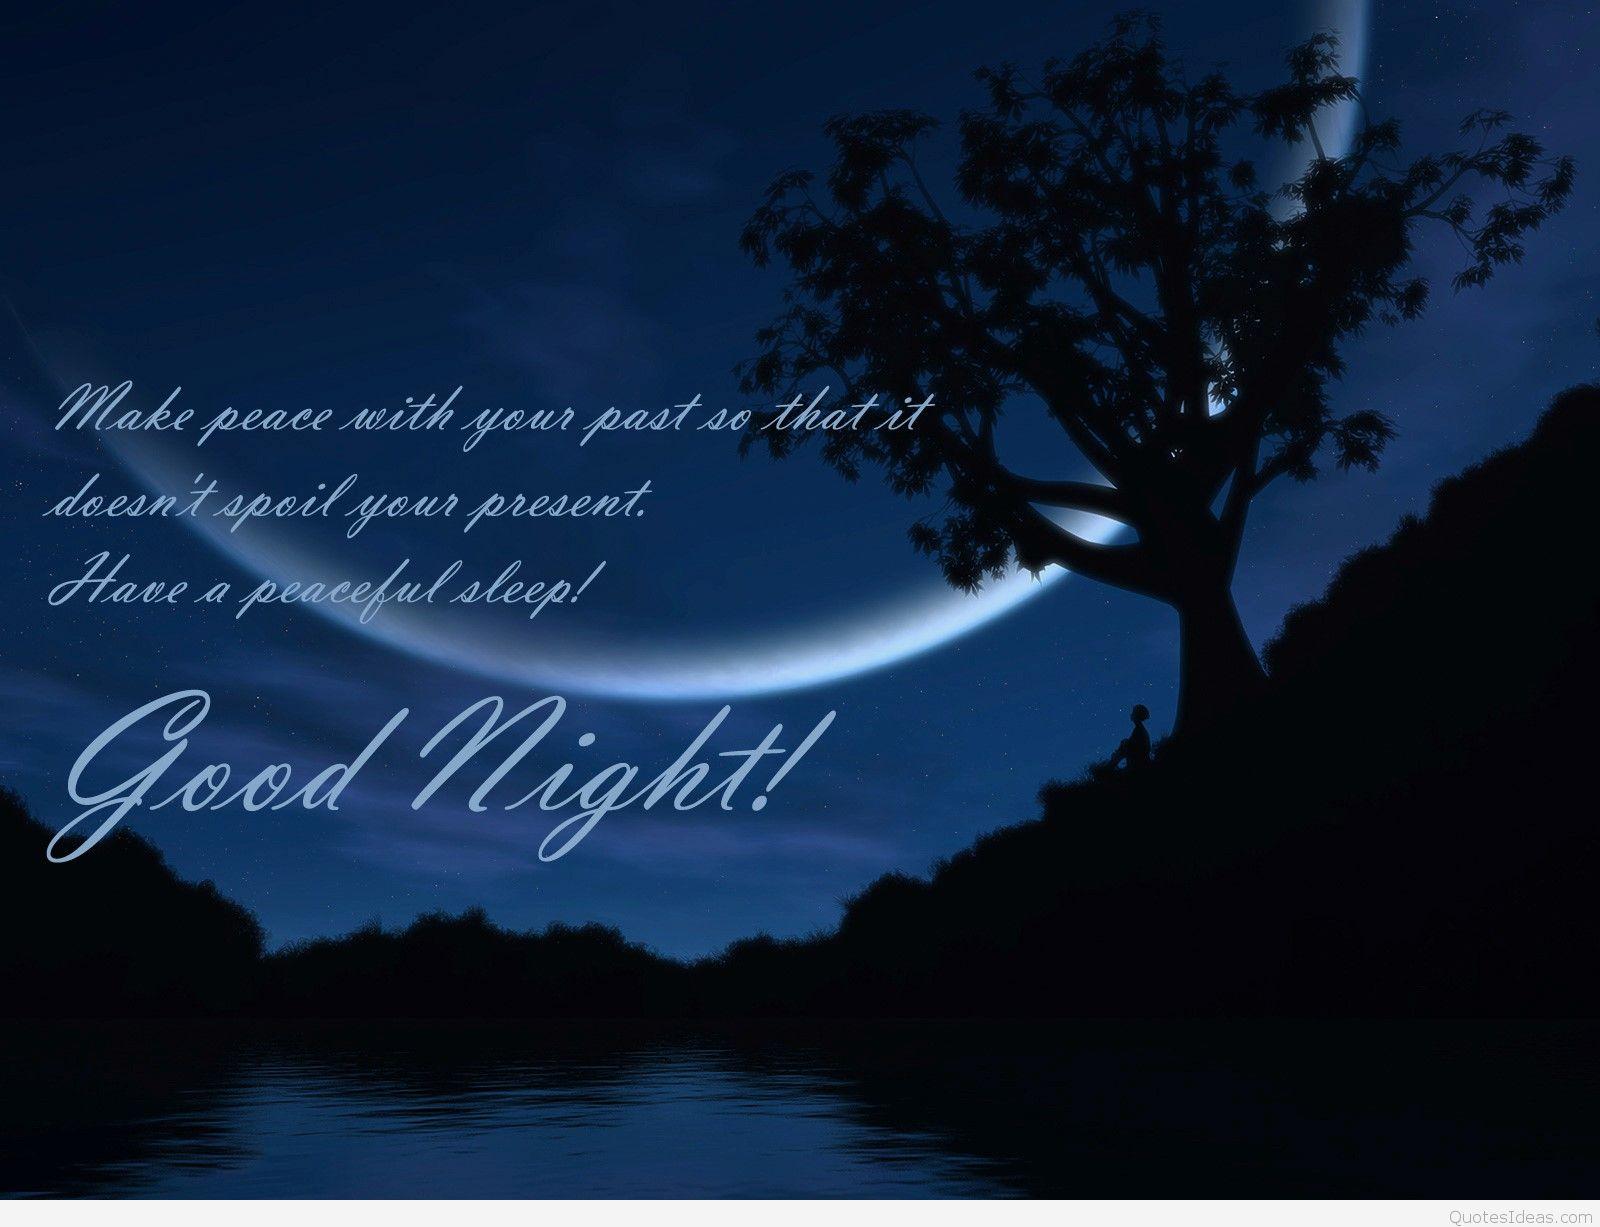 Nice Thought With Good Night, HD Wallpaper & background